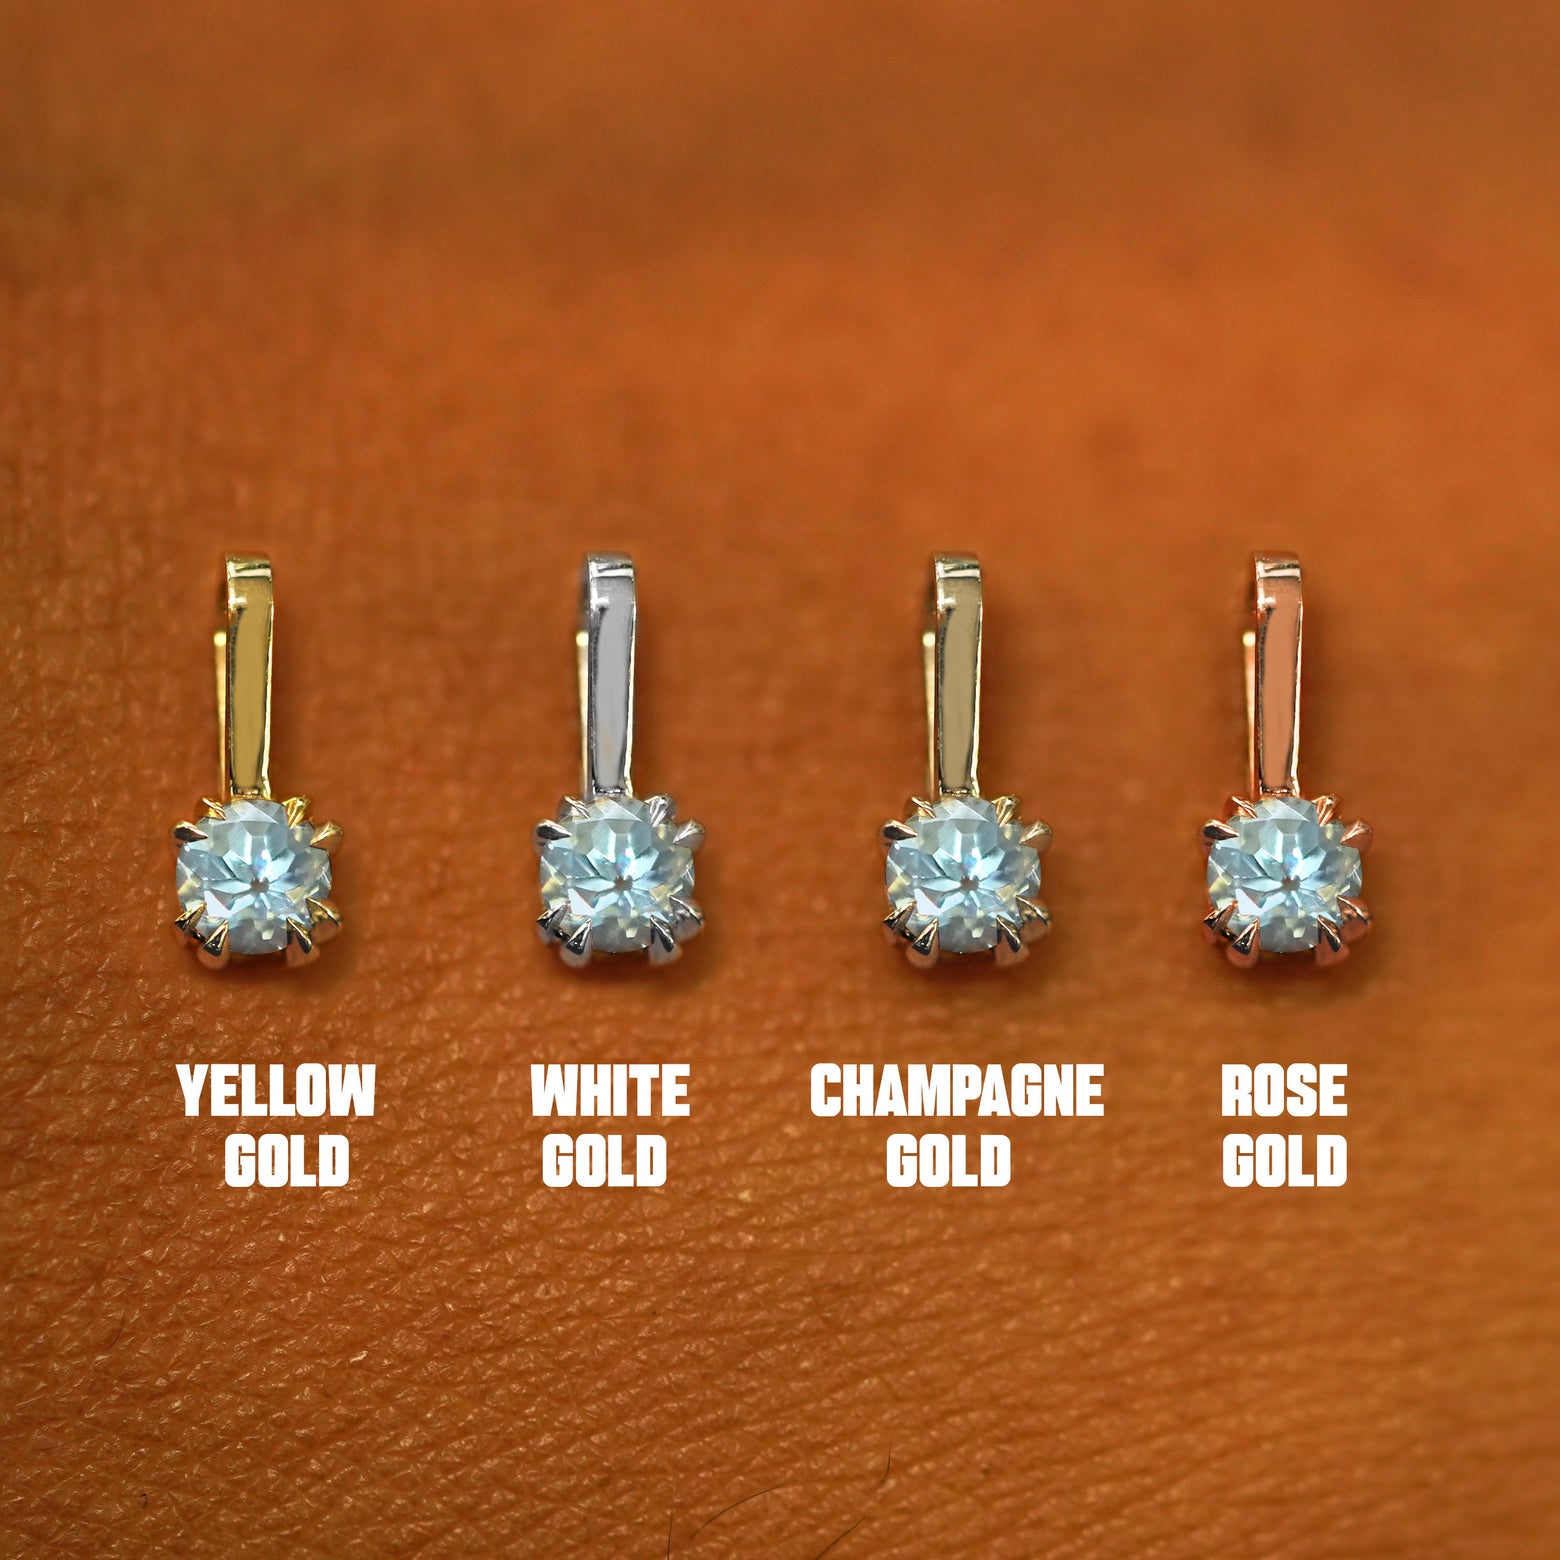 Four versions of the Aquamarine Charm shown in options of yellow, white, rose, and champagne gold